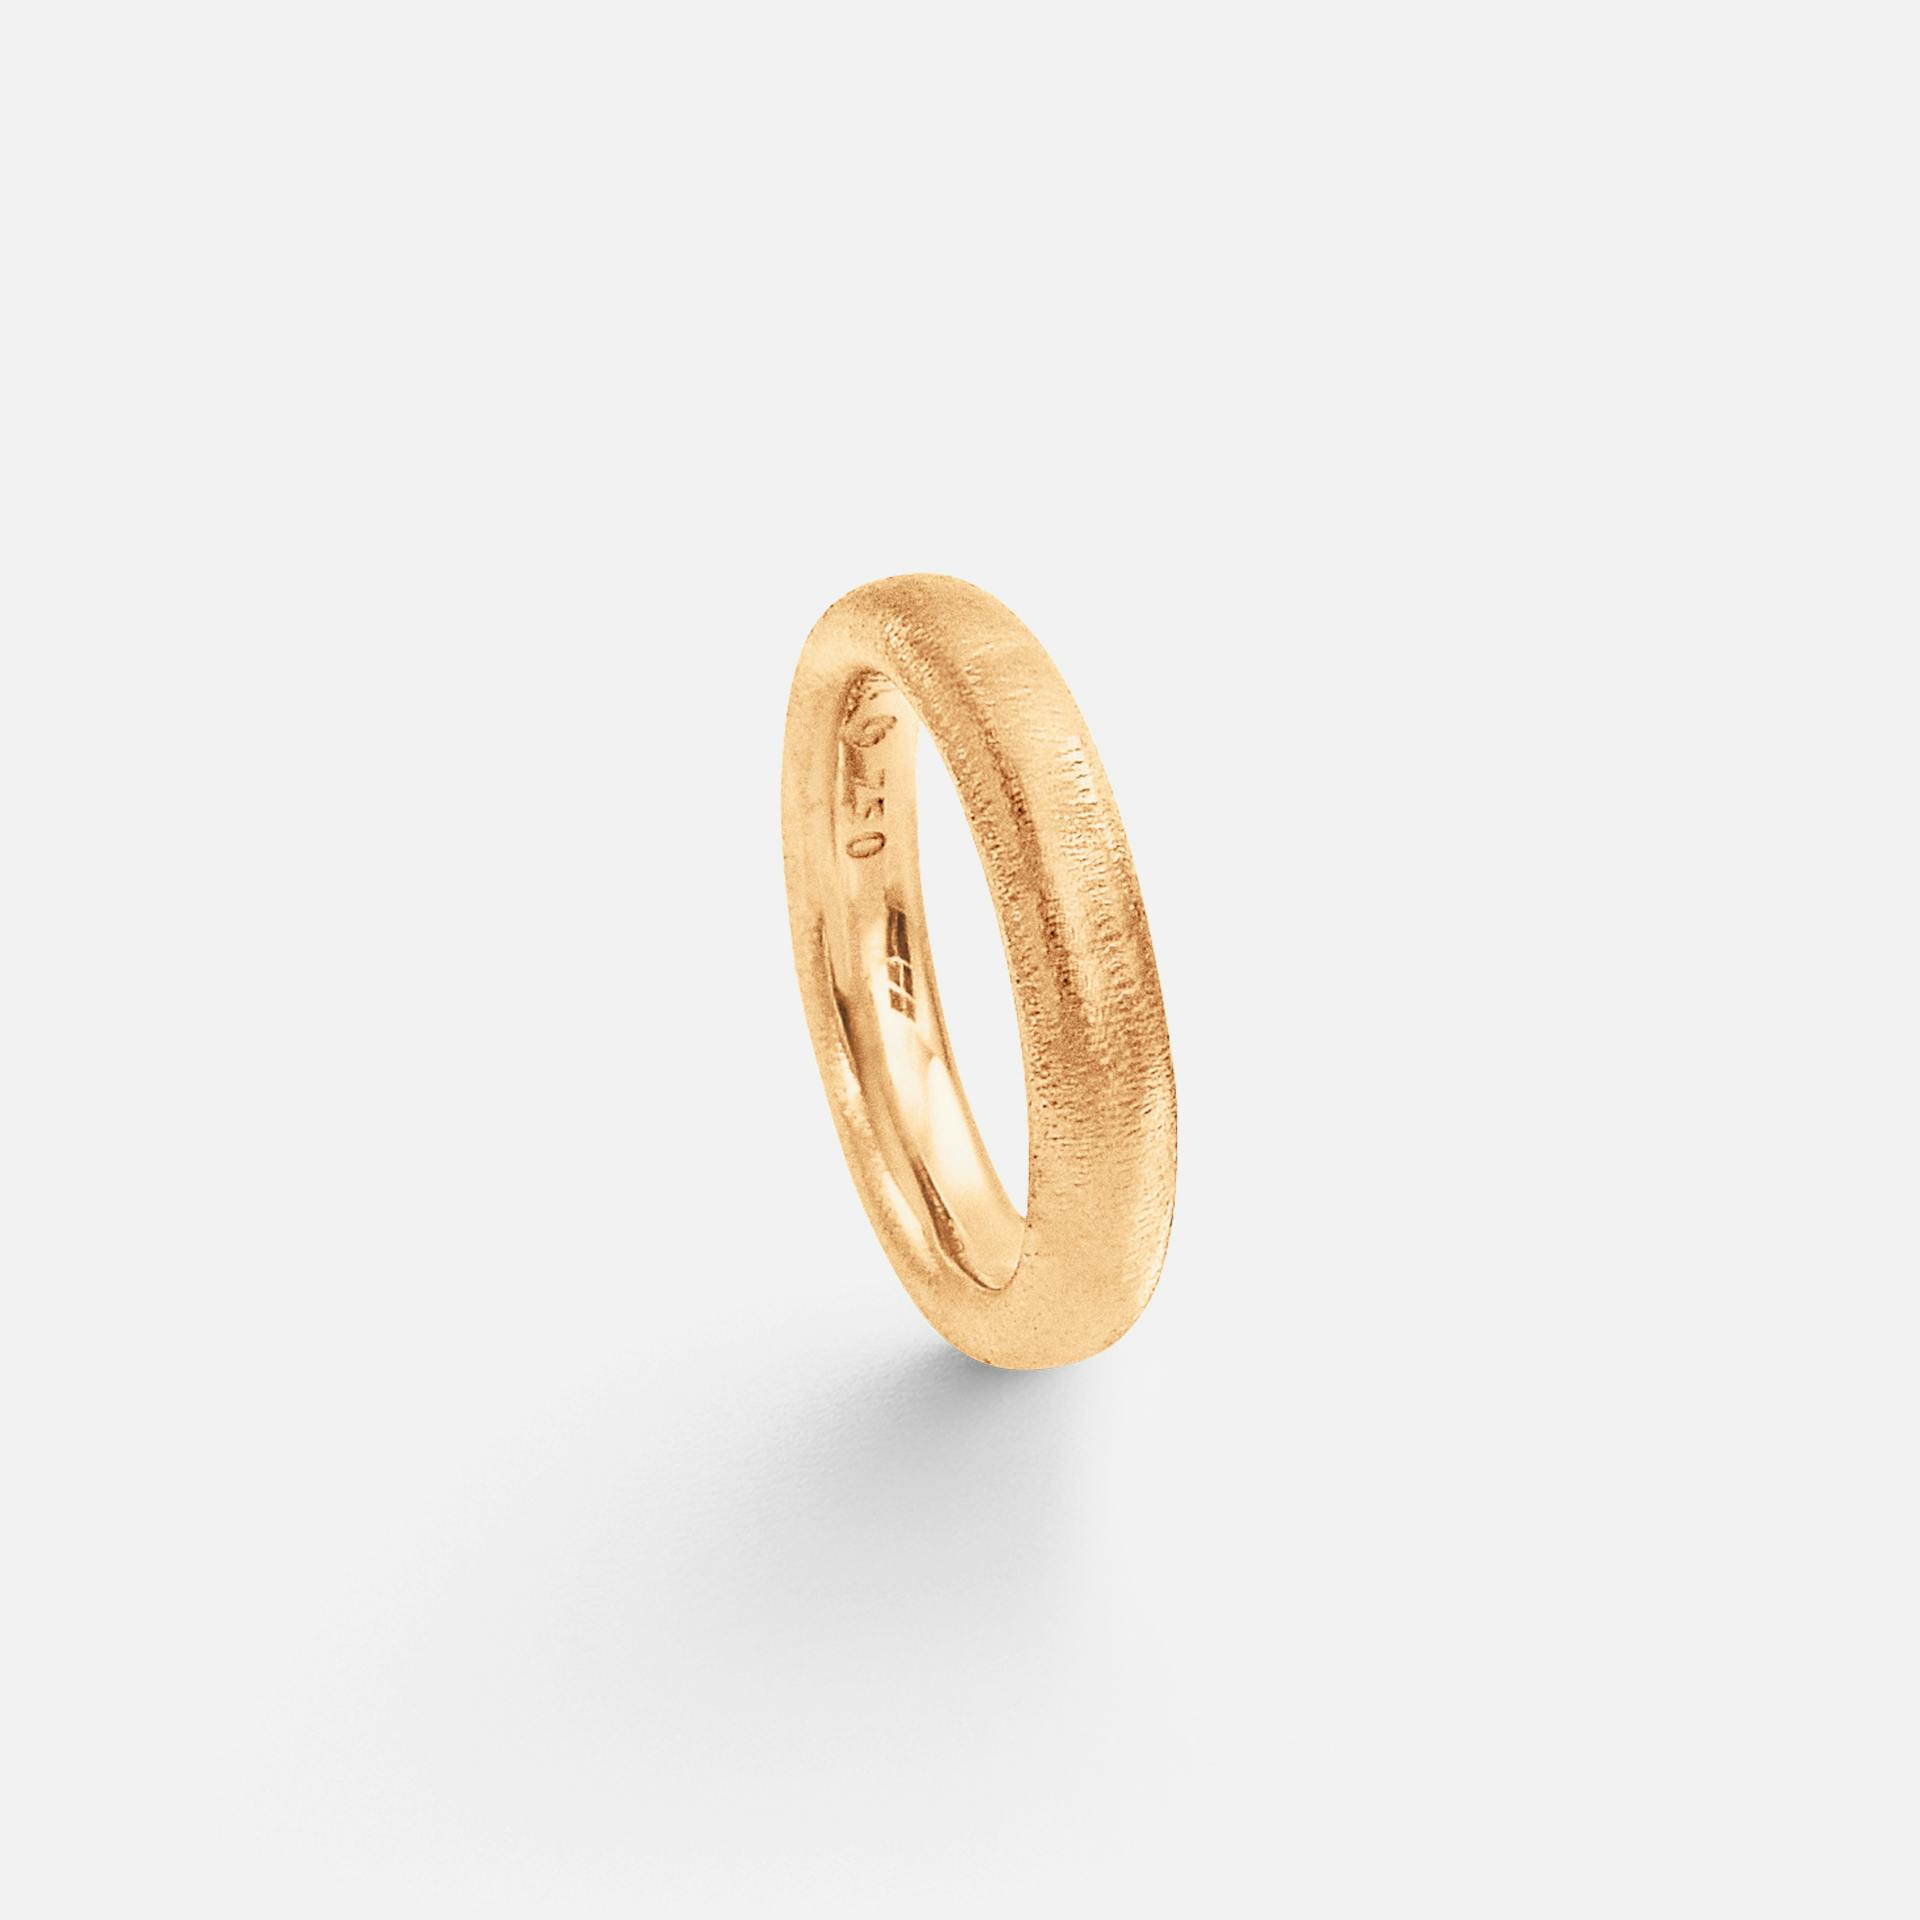 The Ring mens 4mm 18k textured gold